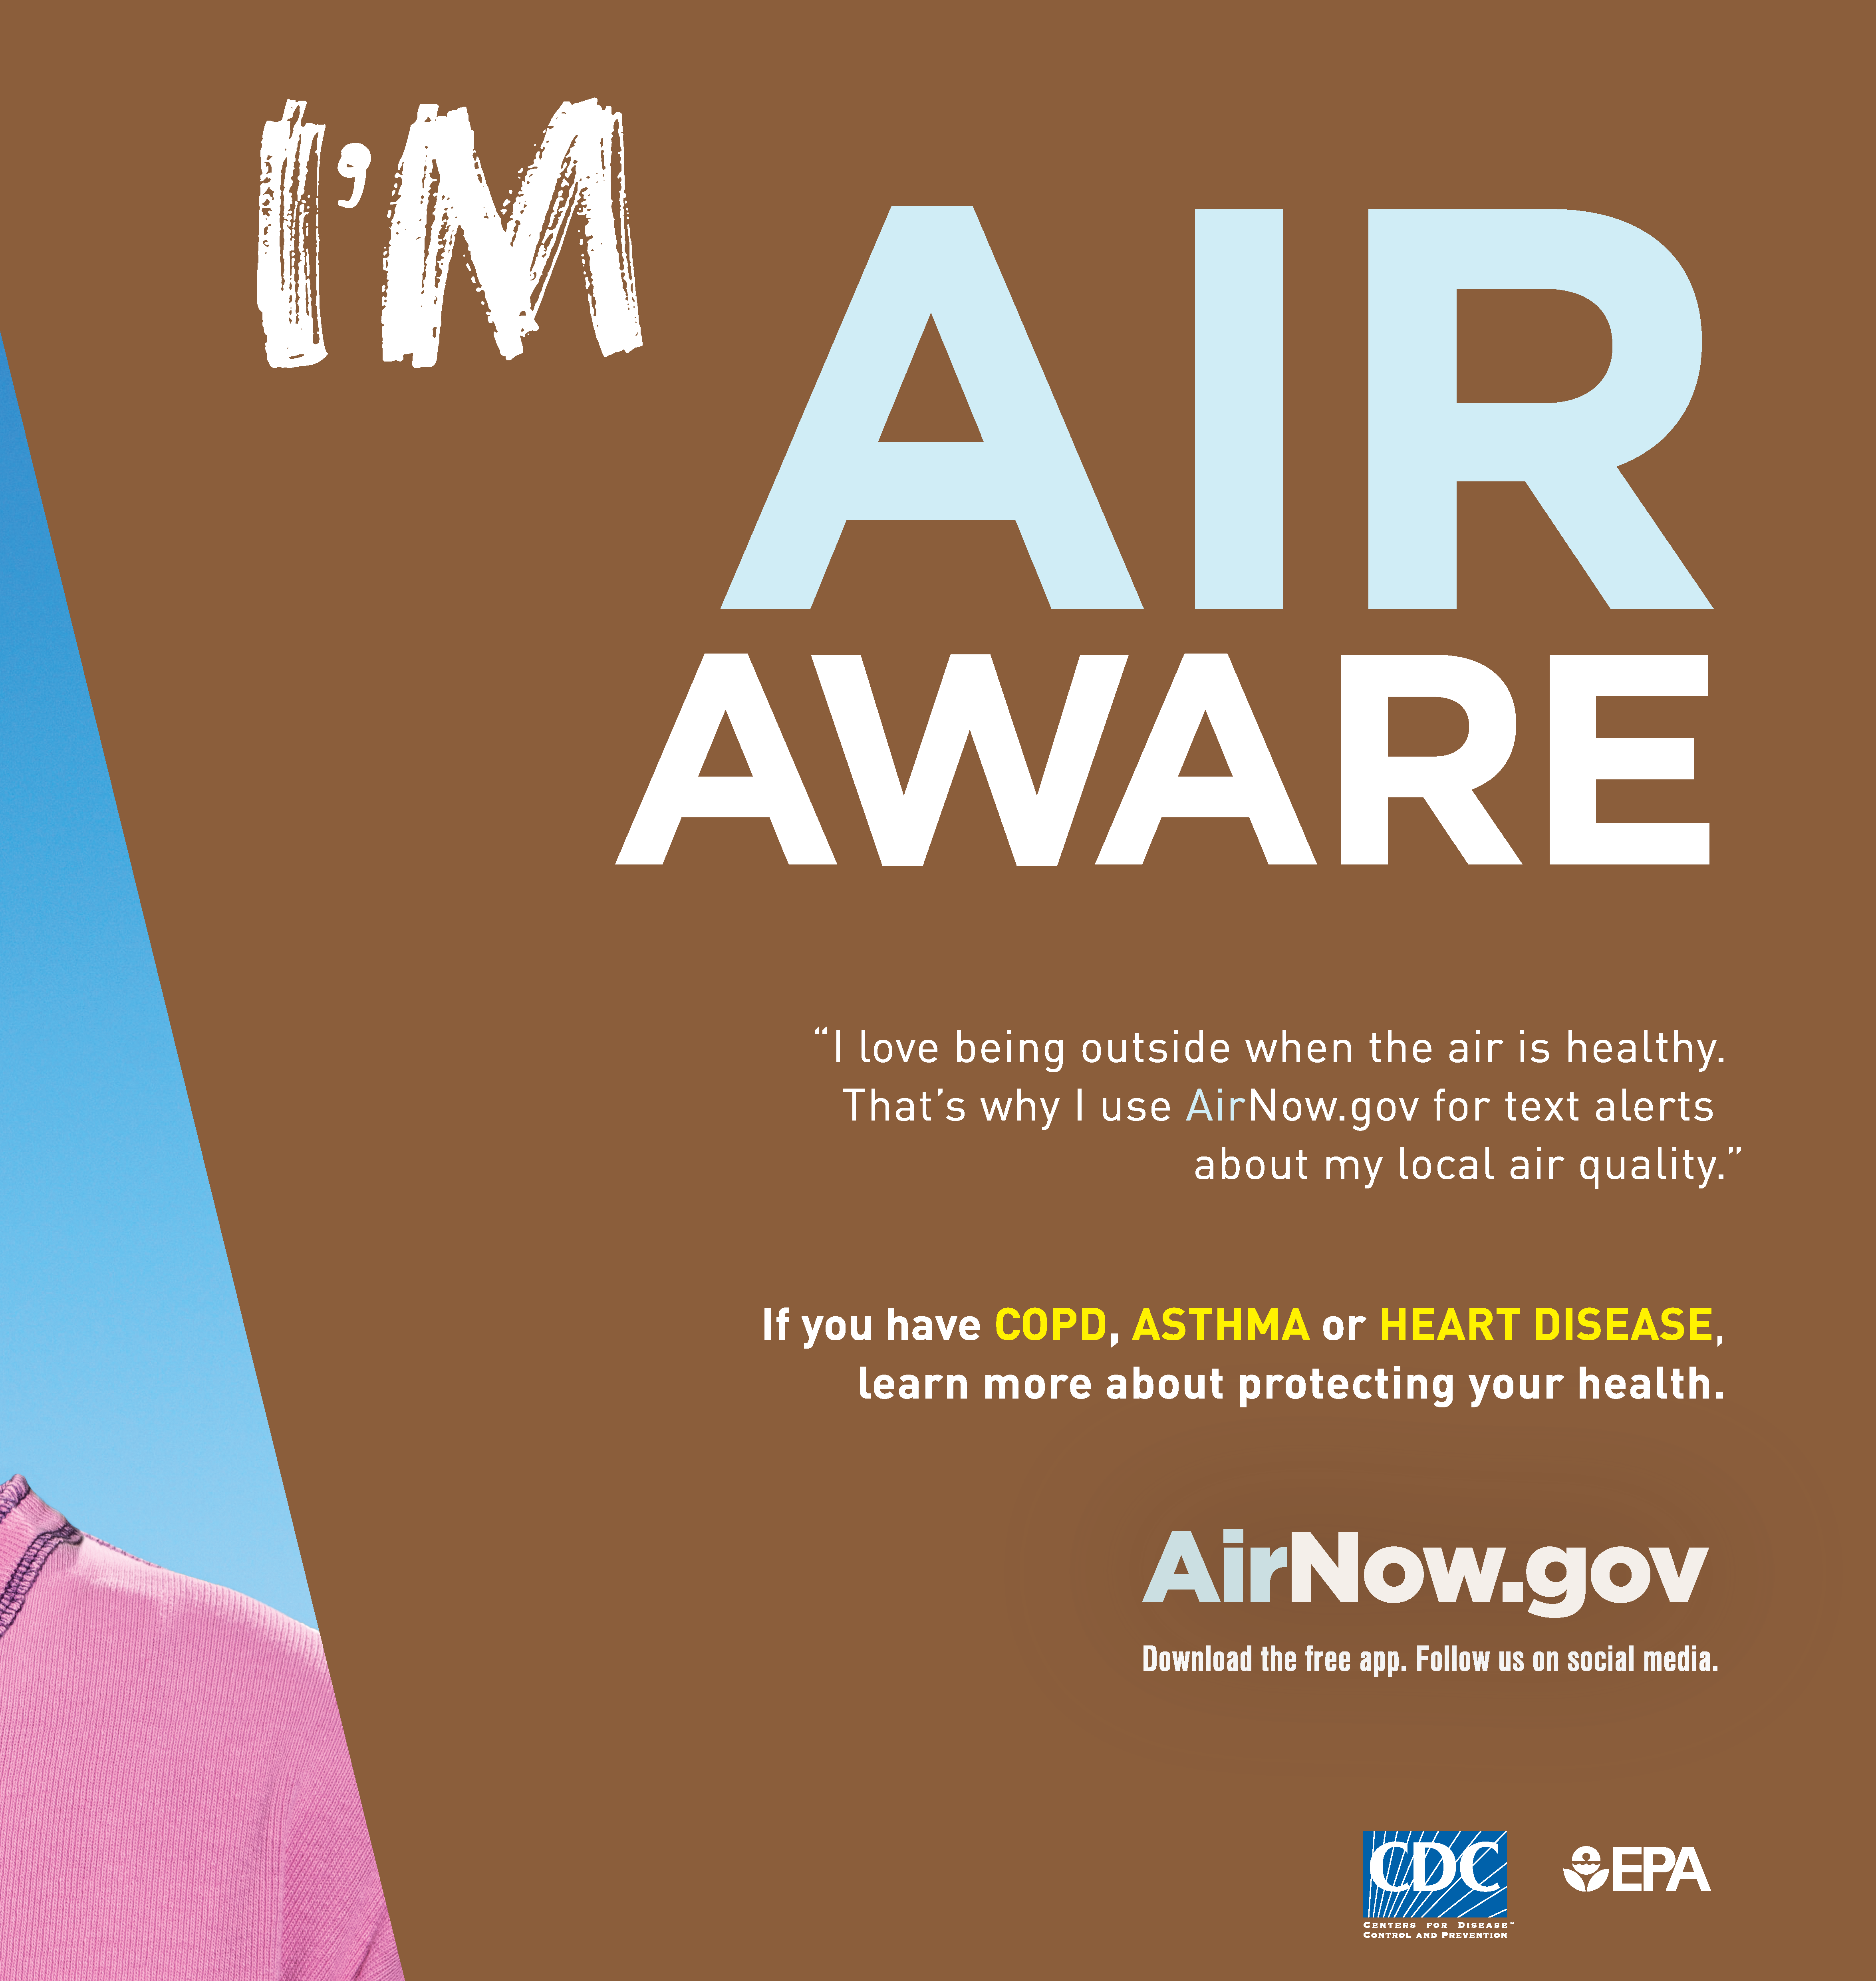 Keep a watch on air quality